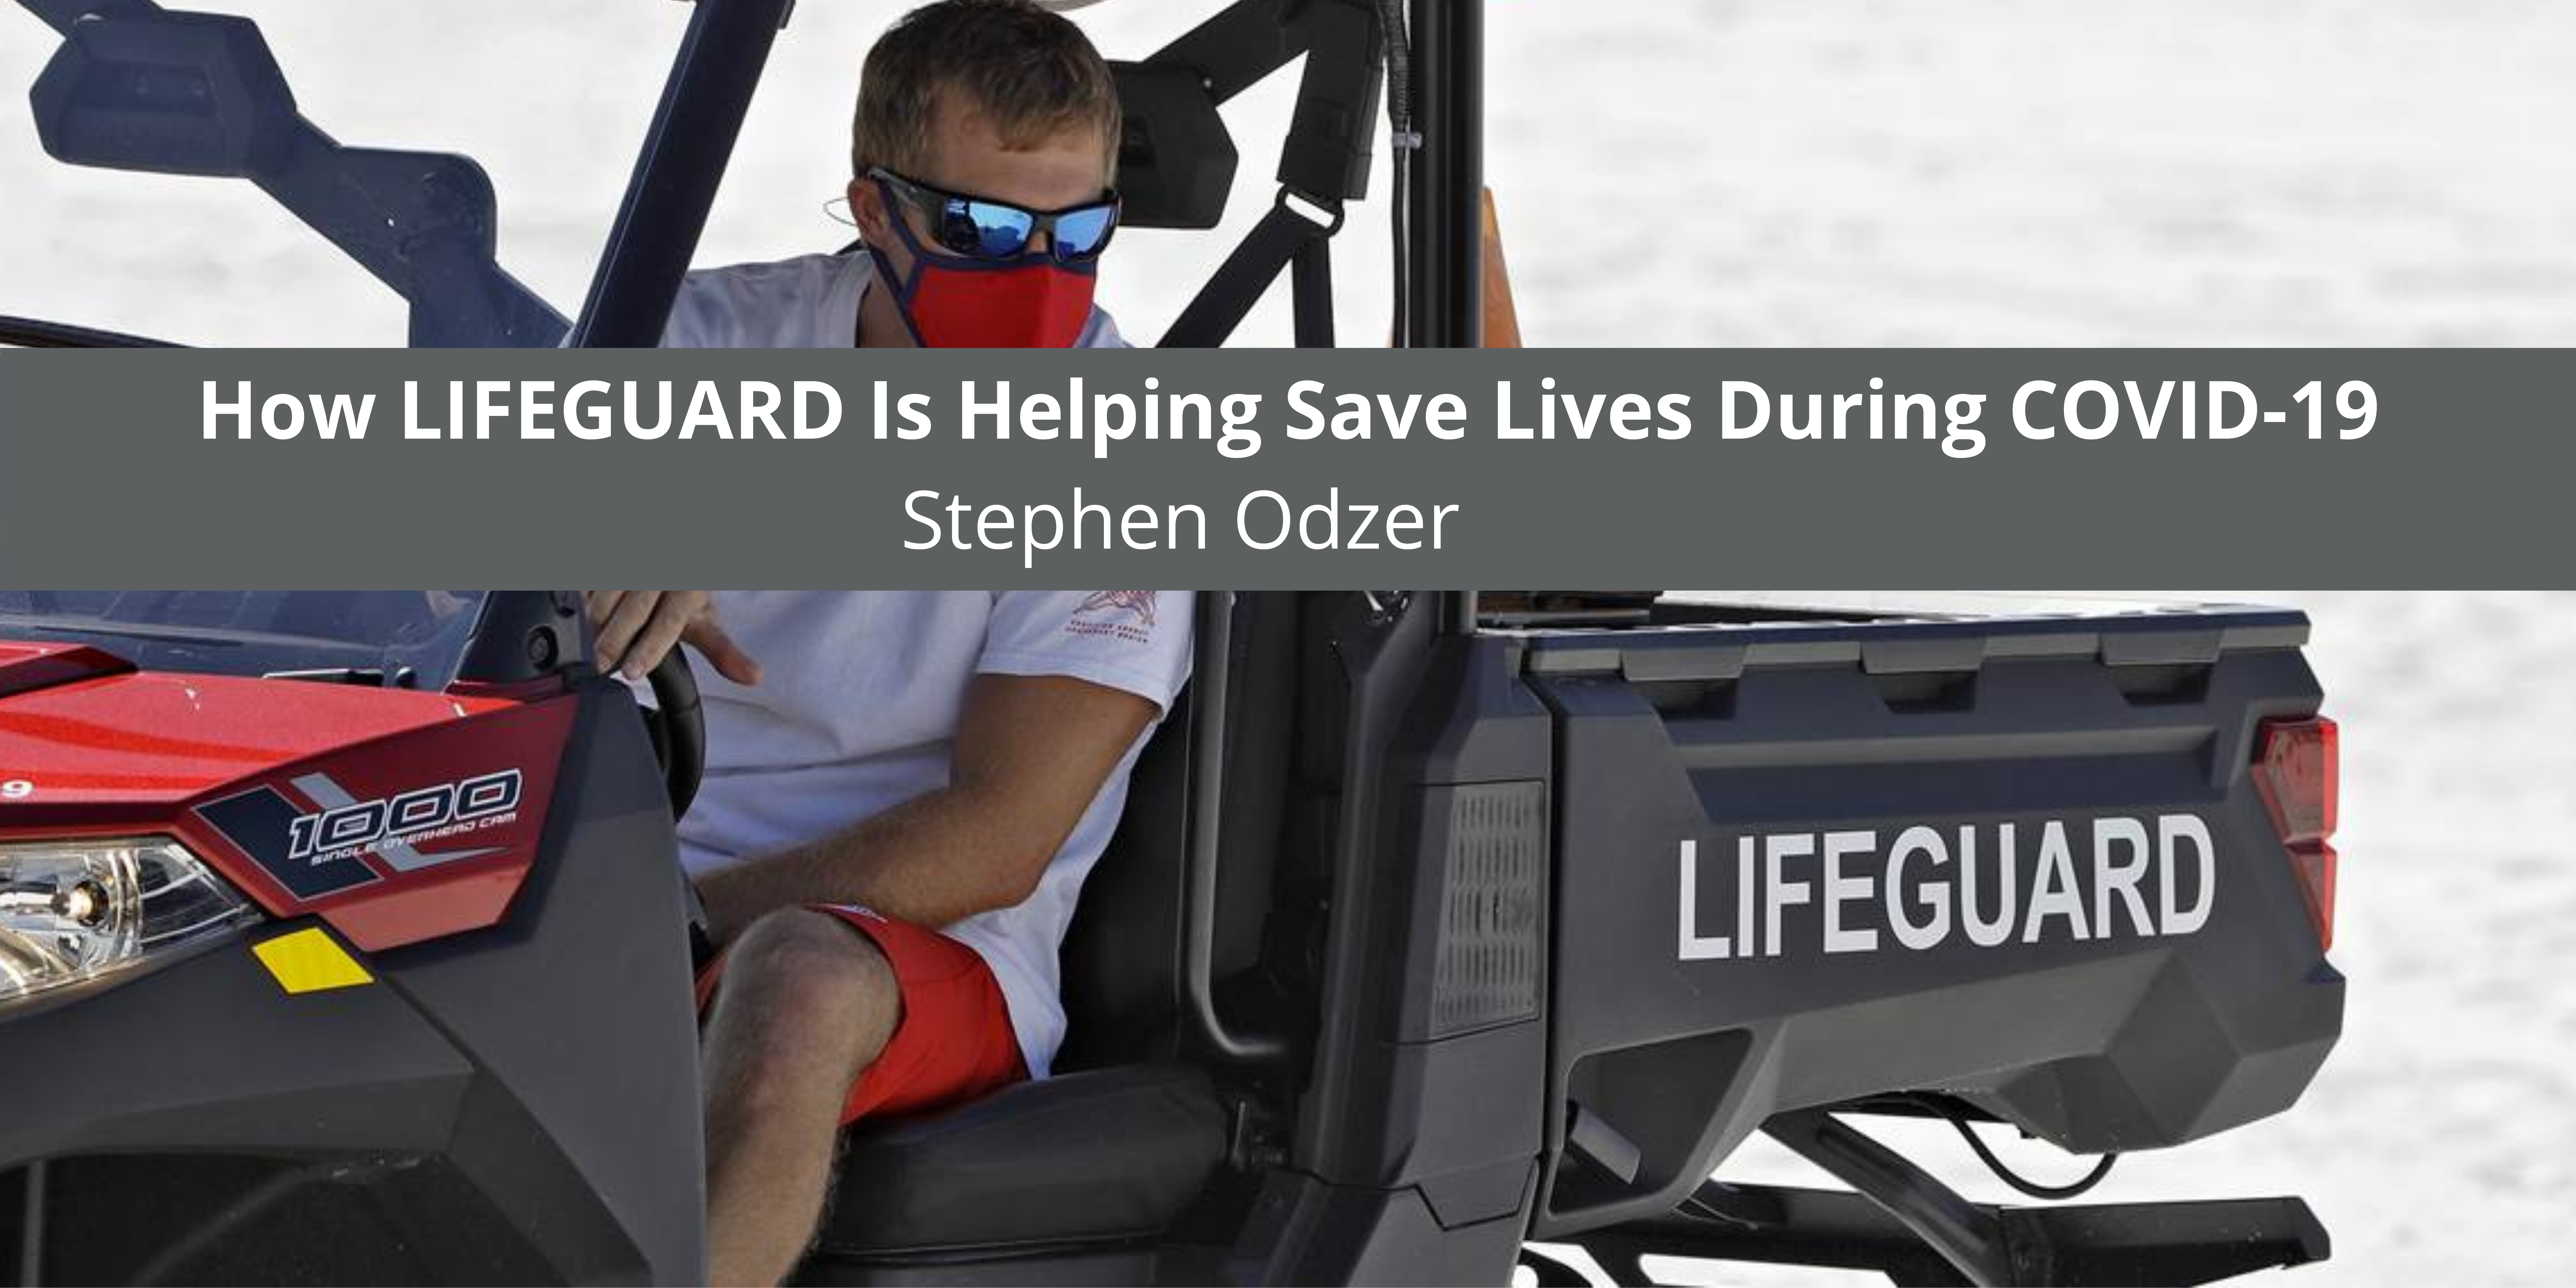 Stephen Odzer Discusses How LIFEGUARD Is Helping Save Lives During COVID-19